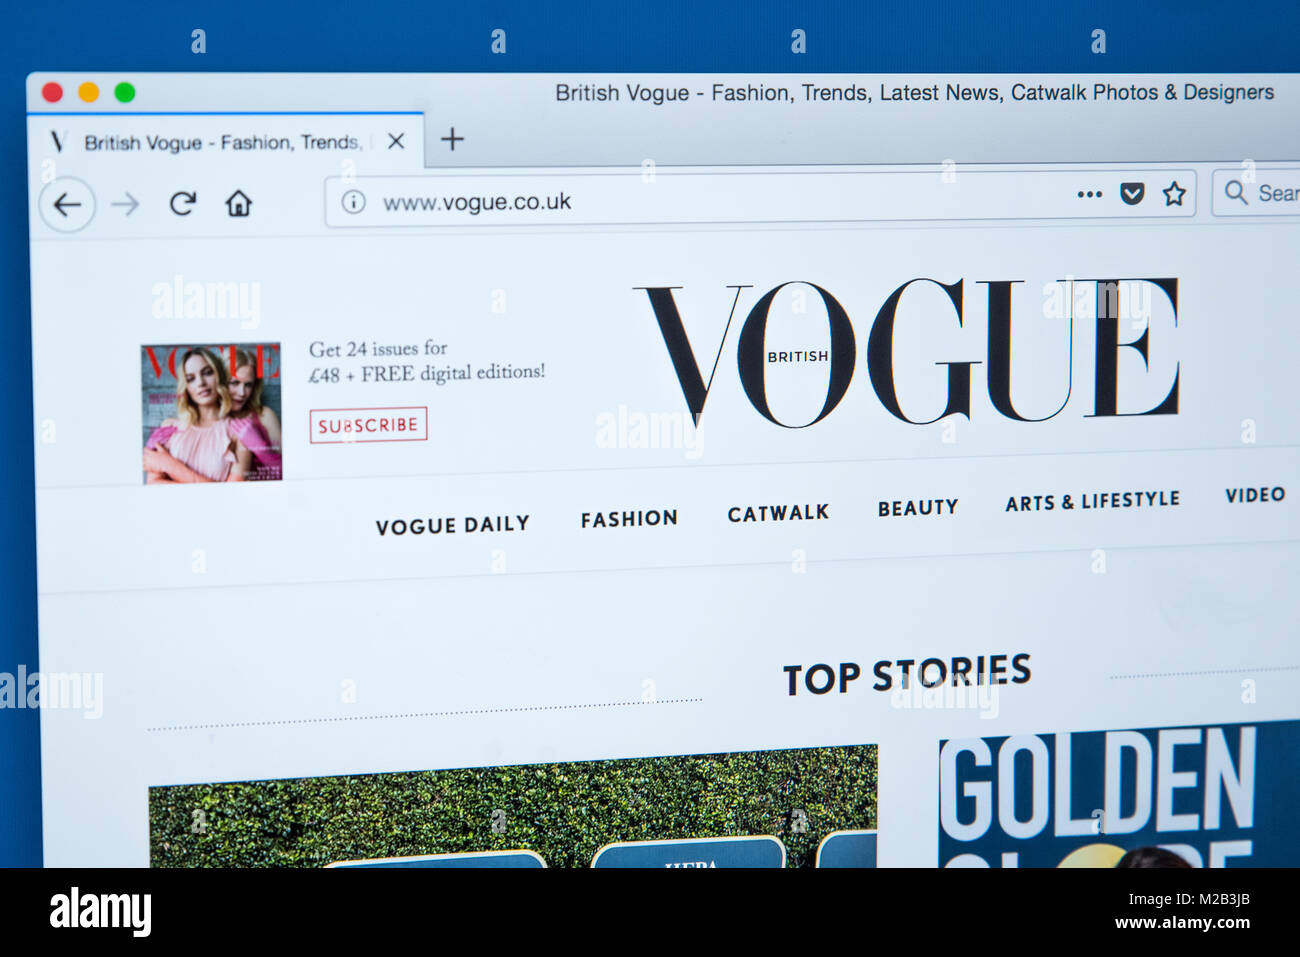 British Vogue Magazine High Resolution Stock Photography and Images - Alamy